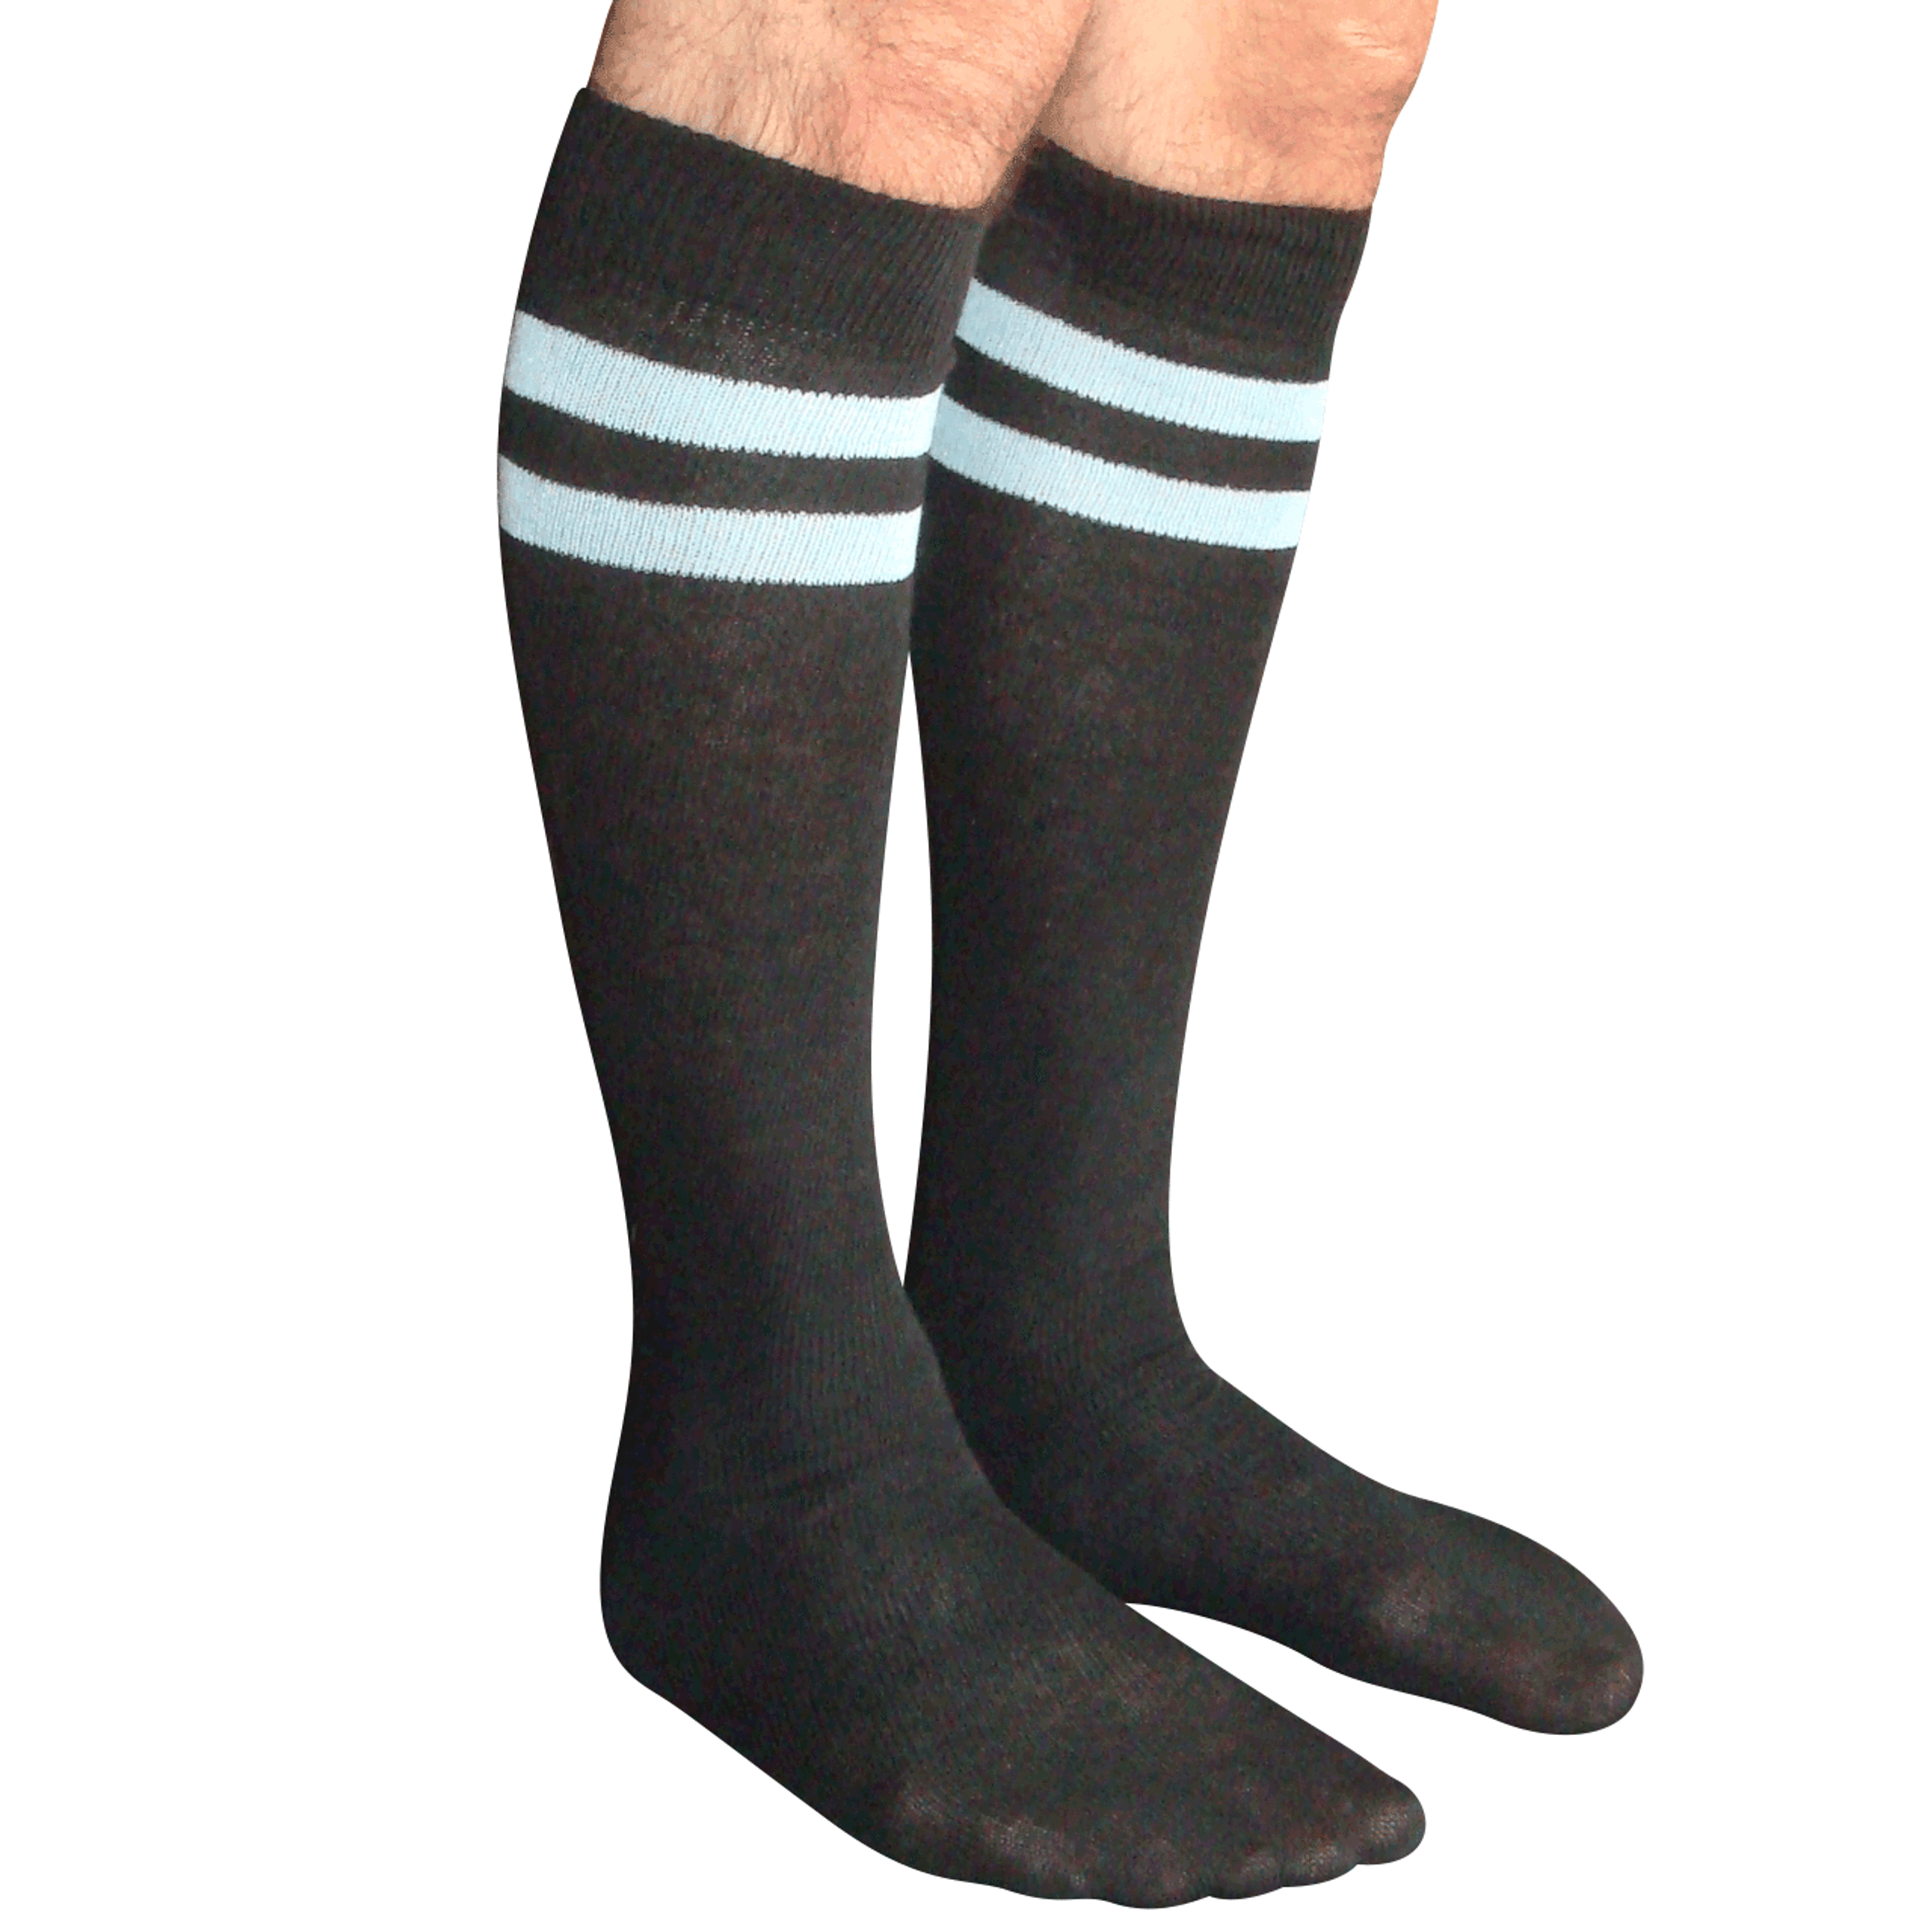 SALE: Cheap Socks - Up To 90% OFF